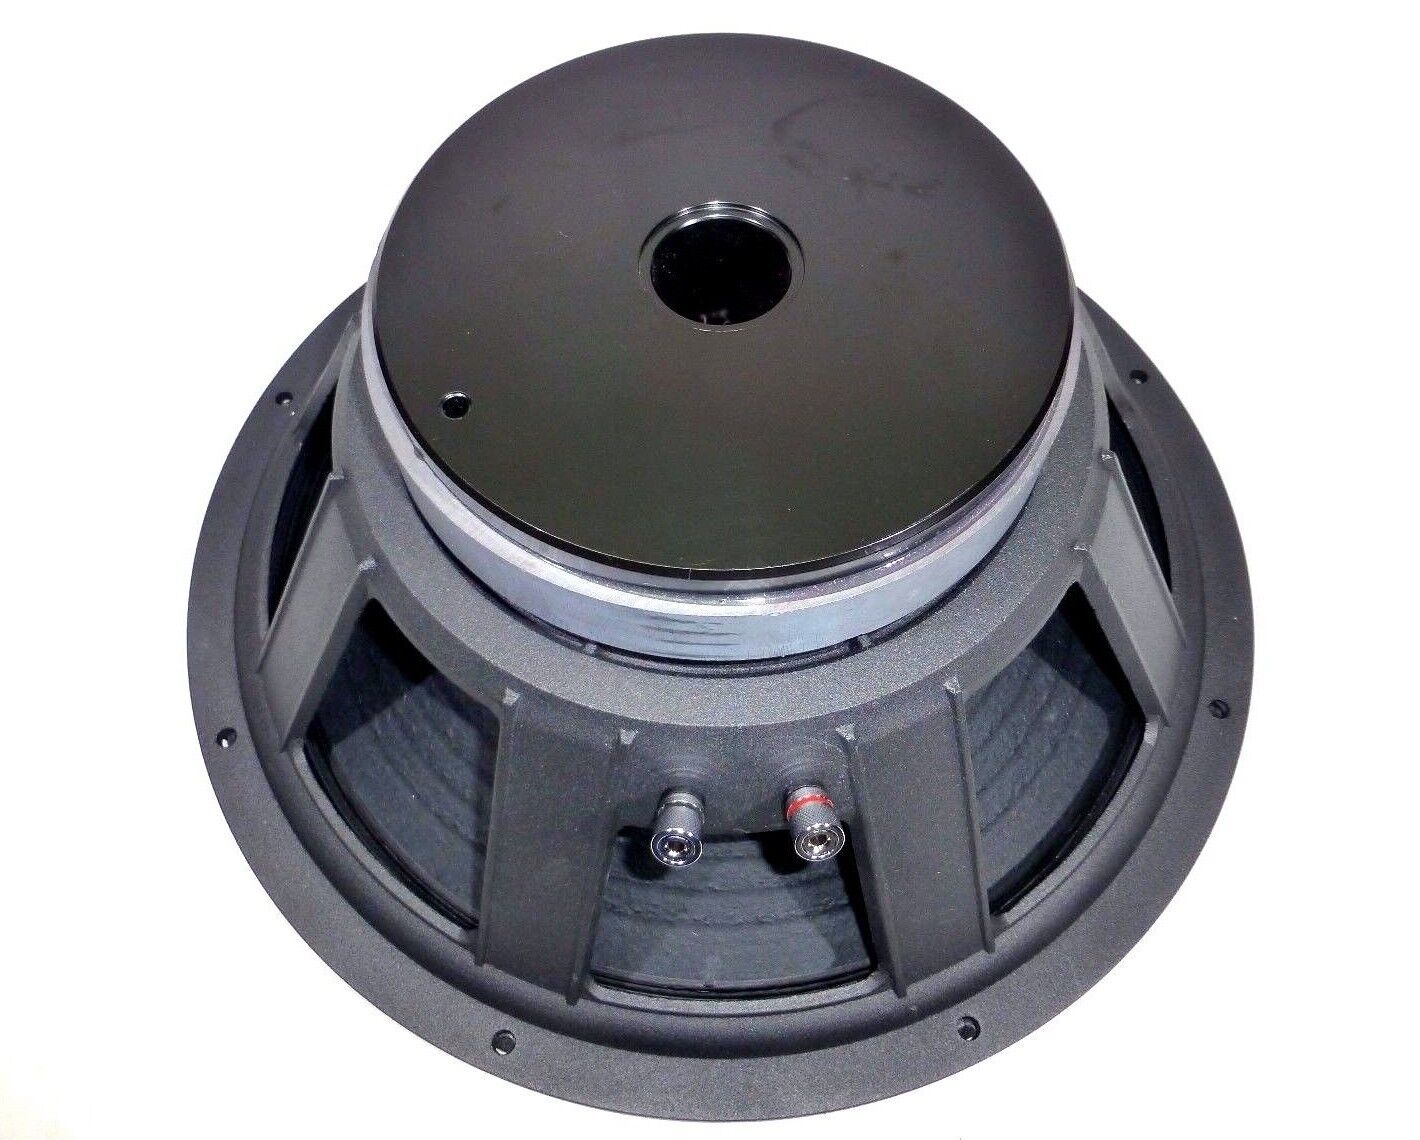 LASE Replacement 15" Speaker for BAG END E-15 BASS S15 & More